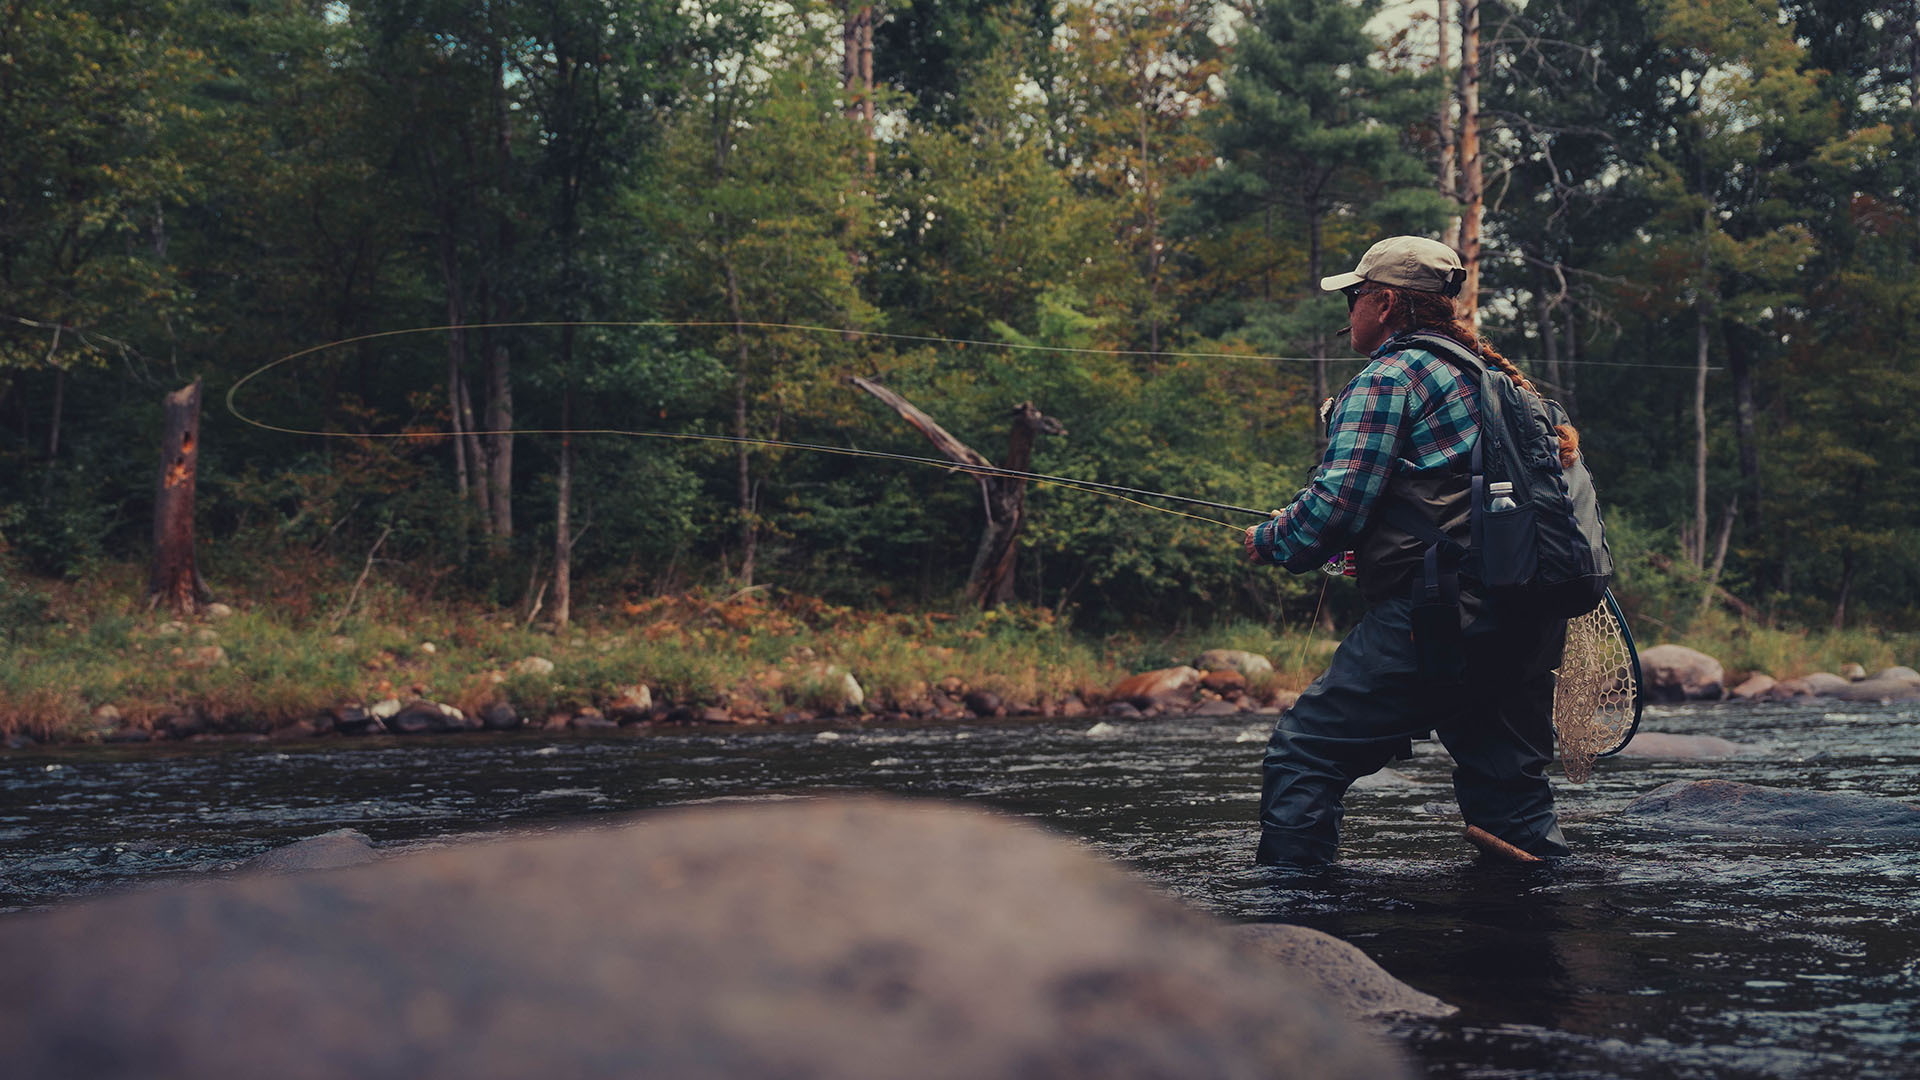 AFTER YOU'VE GONE - Fly Fishing Film Tour